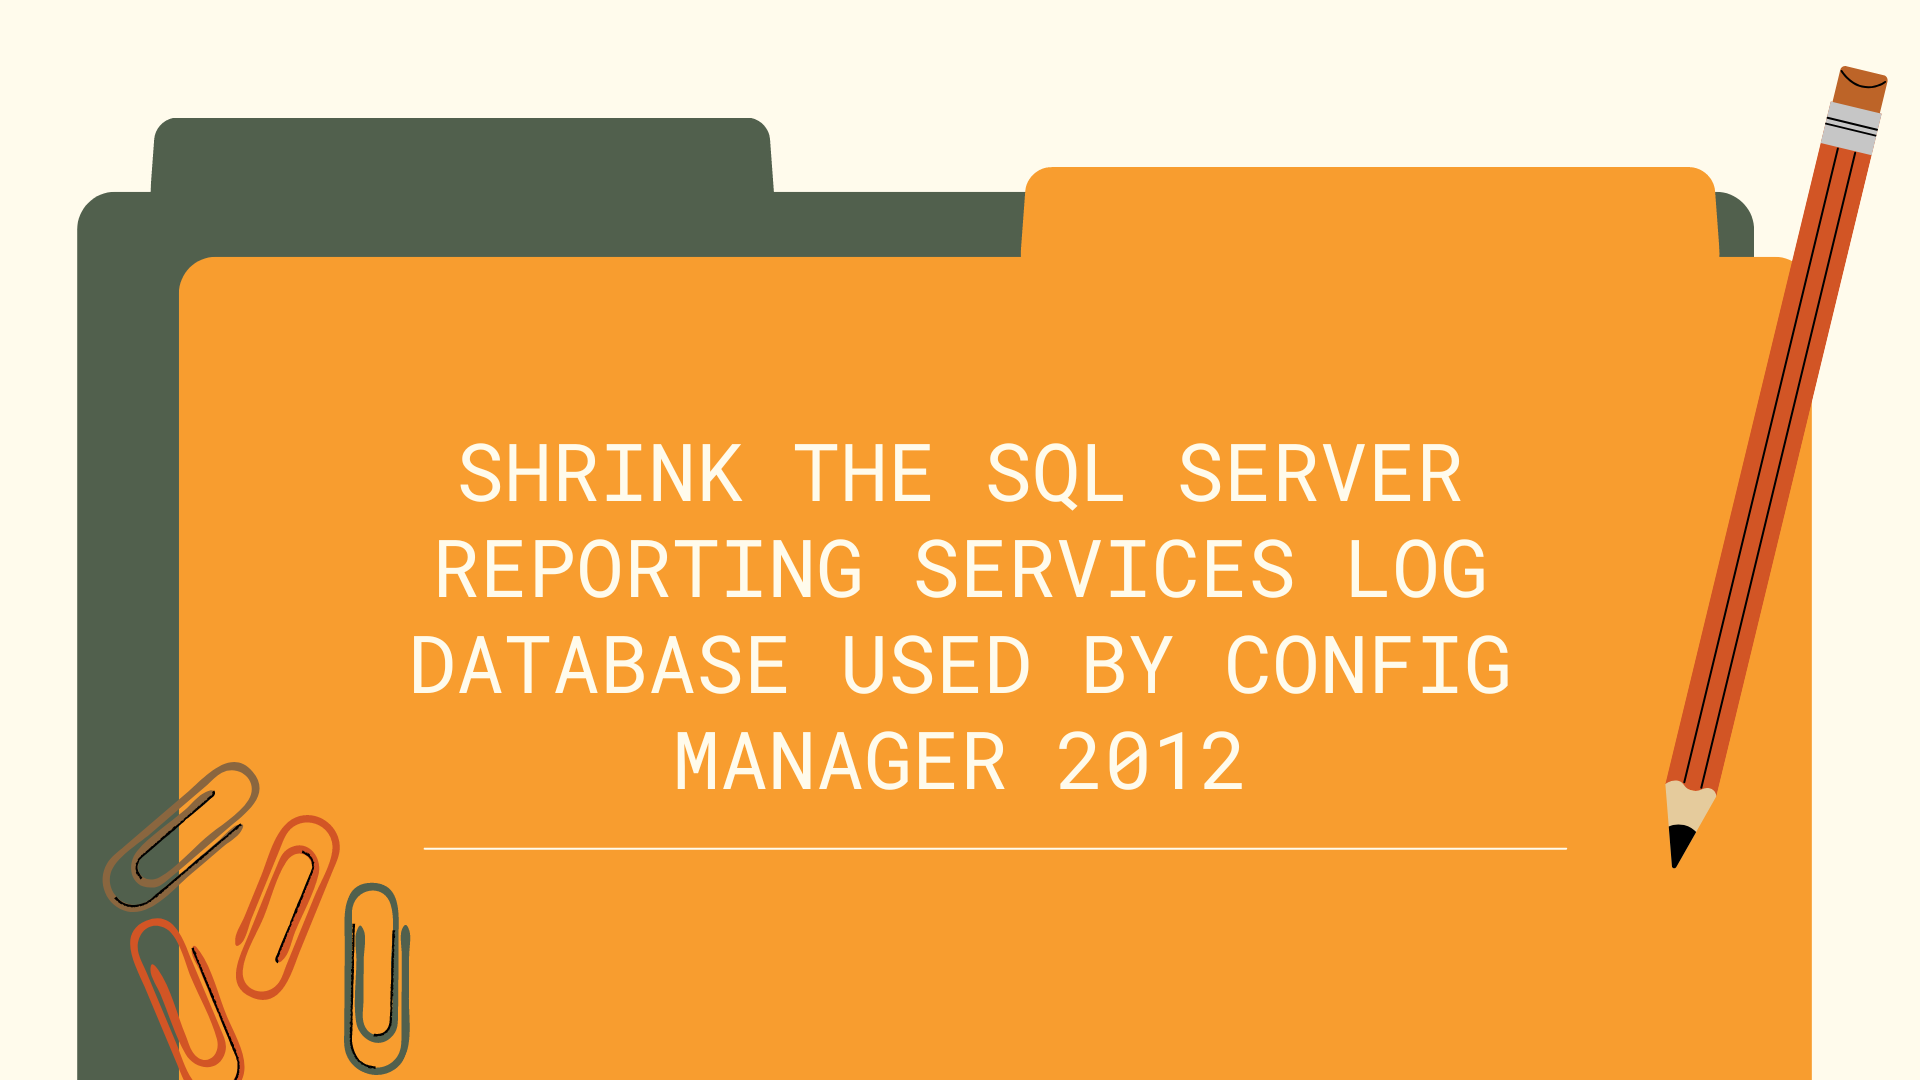 Shrink the SQL Server Reporting Services log database used by ConfigMgr 2012